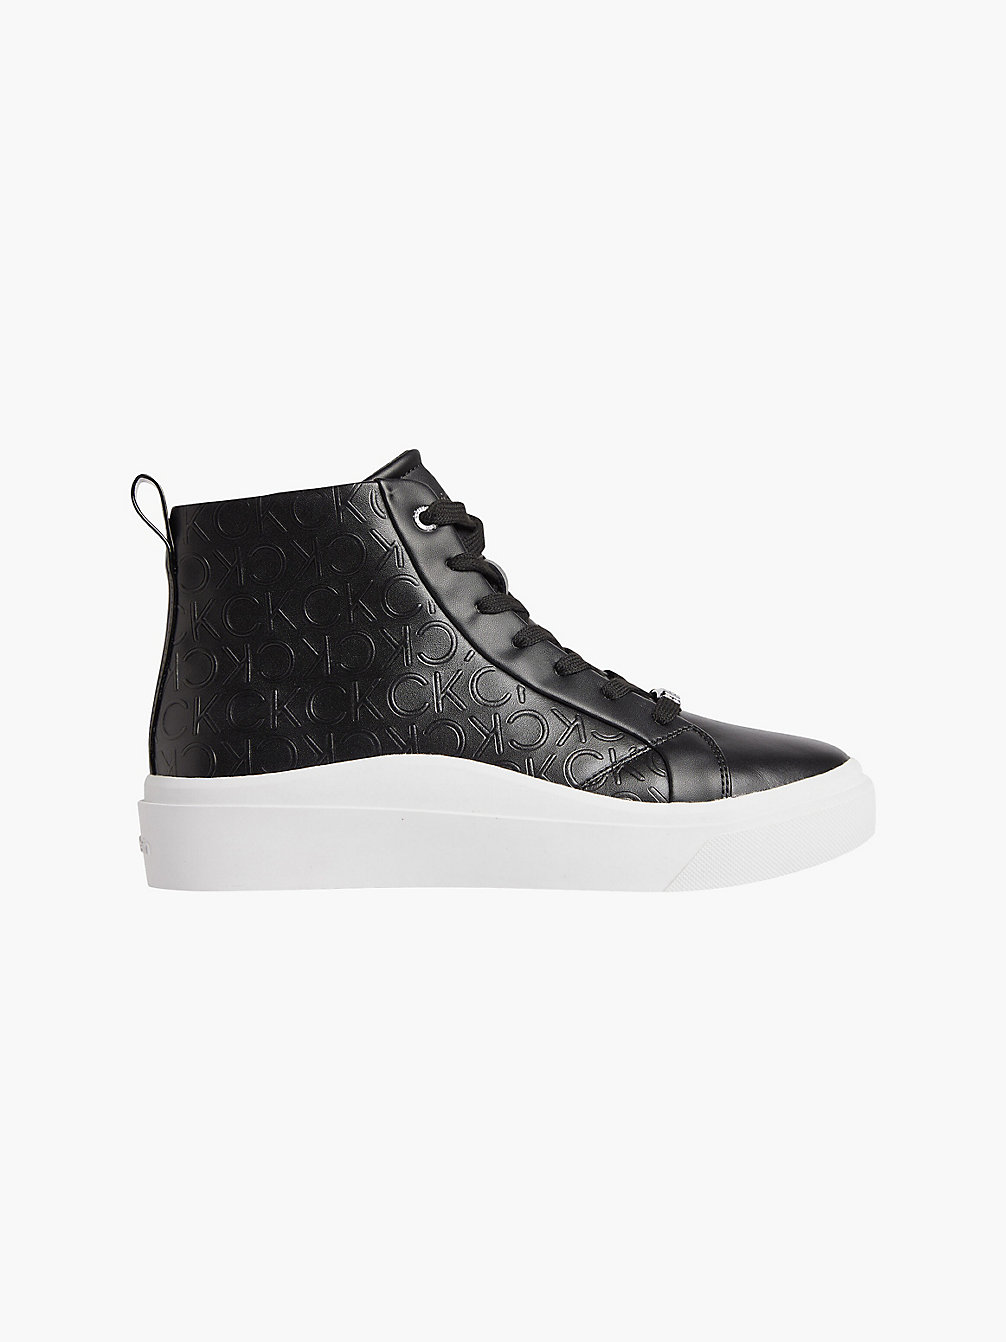 CK BLACK Leather Logo High-Top Trainers undefined women Calvin Klein